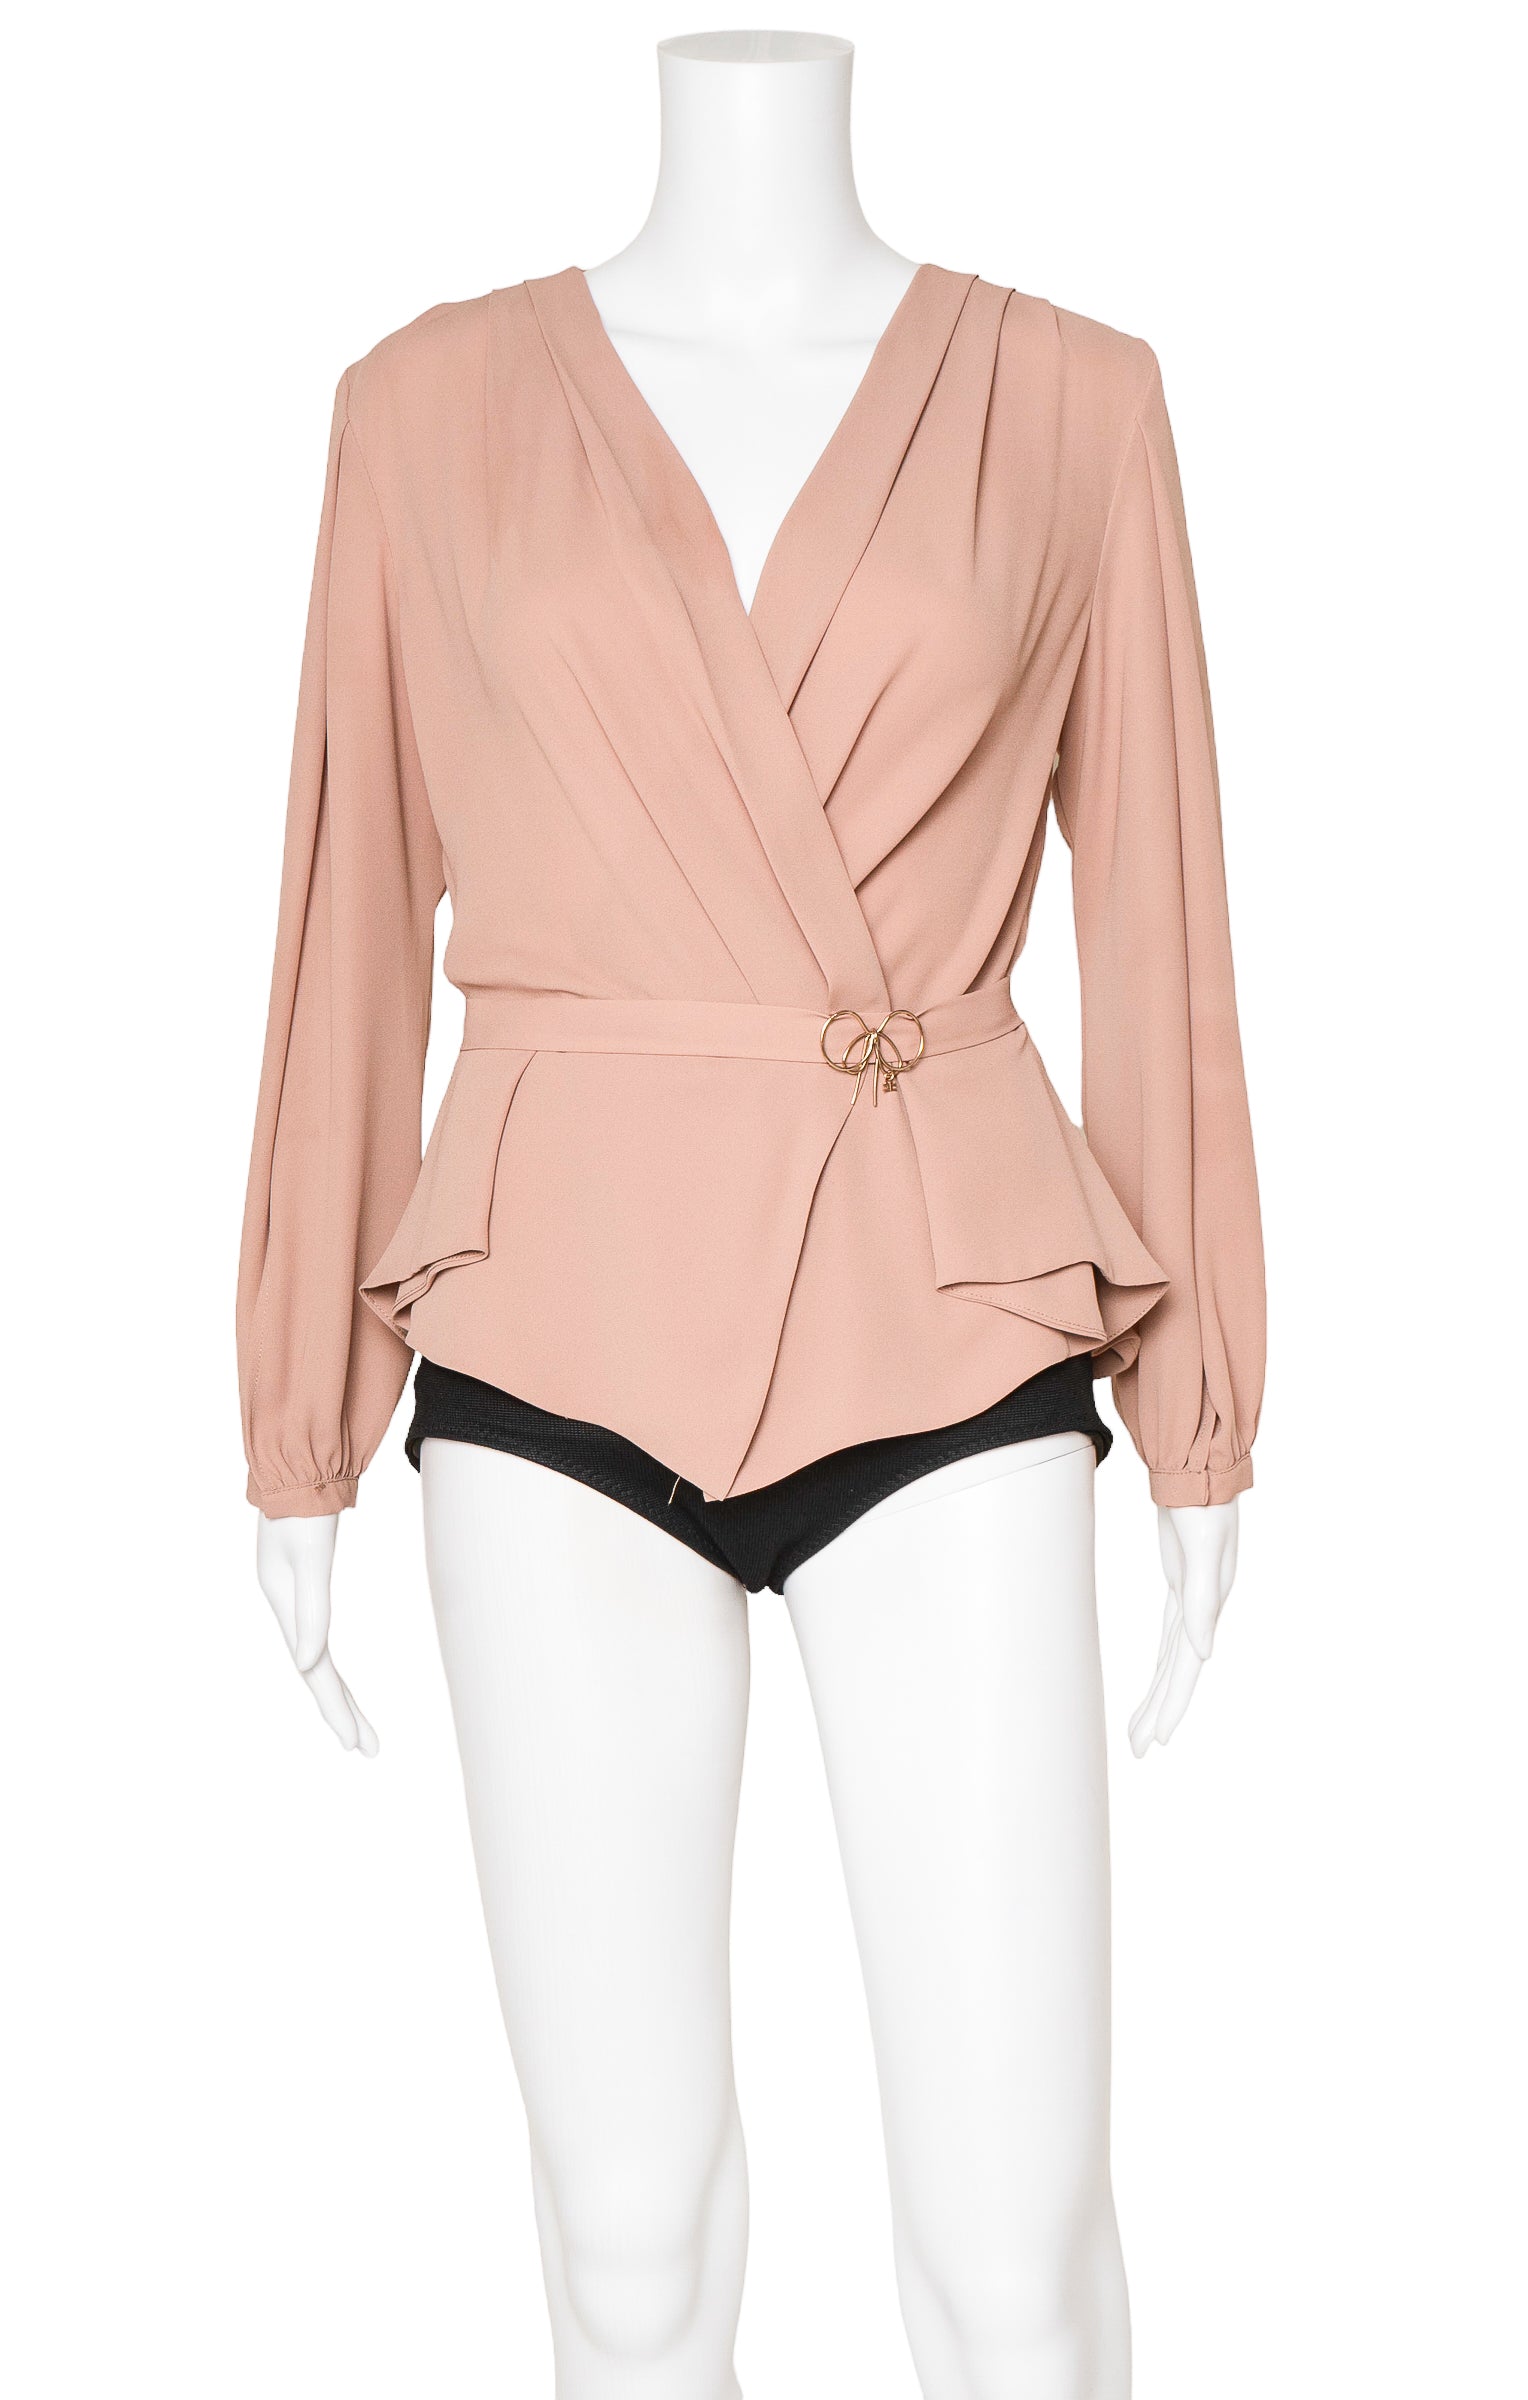 ELISABETTA FRANCHI Top Size: IT 42 / Comparable to US 4-6